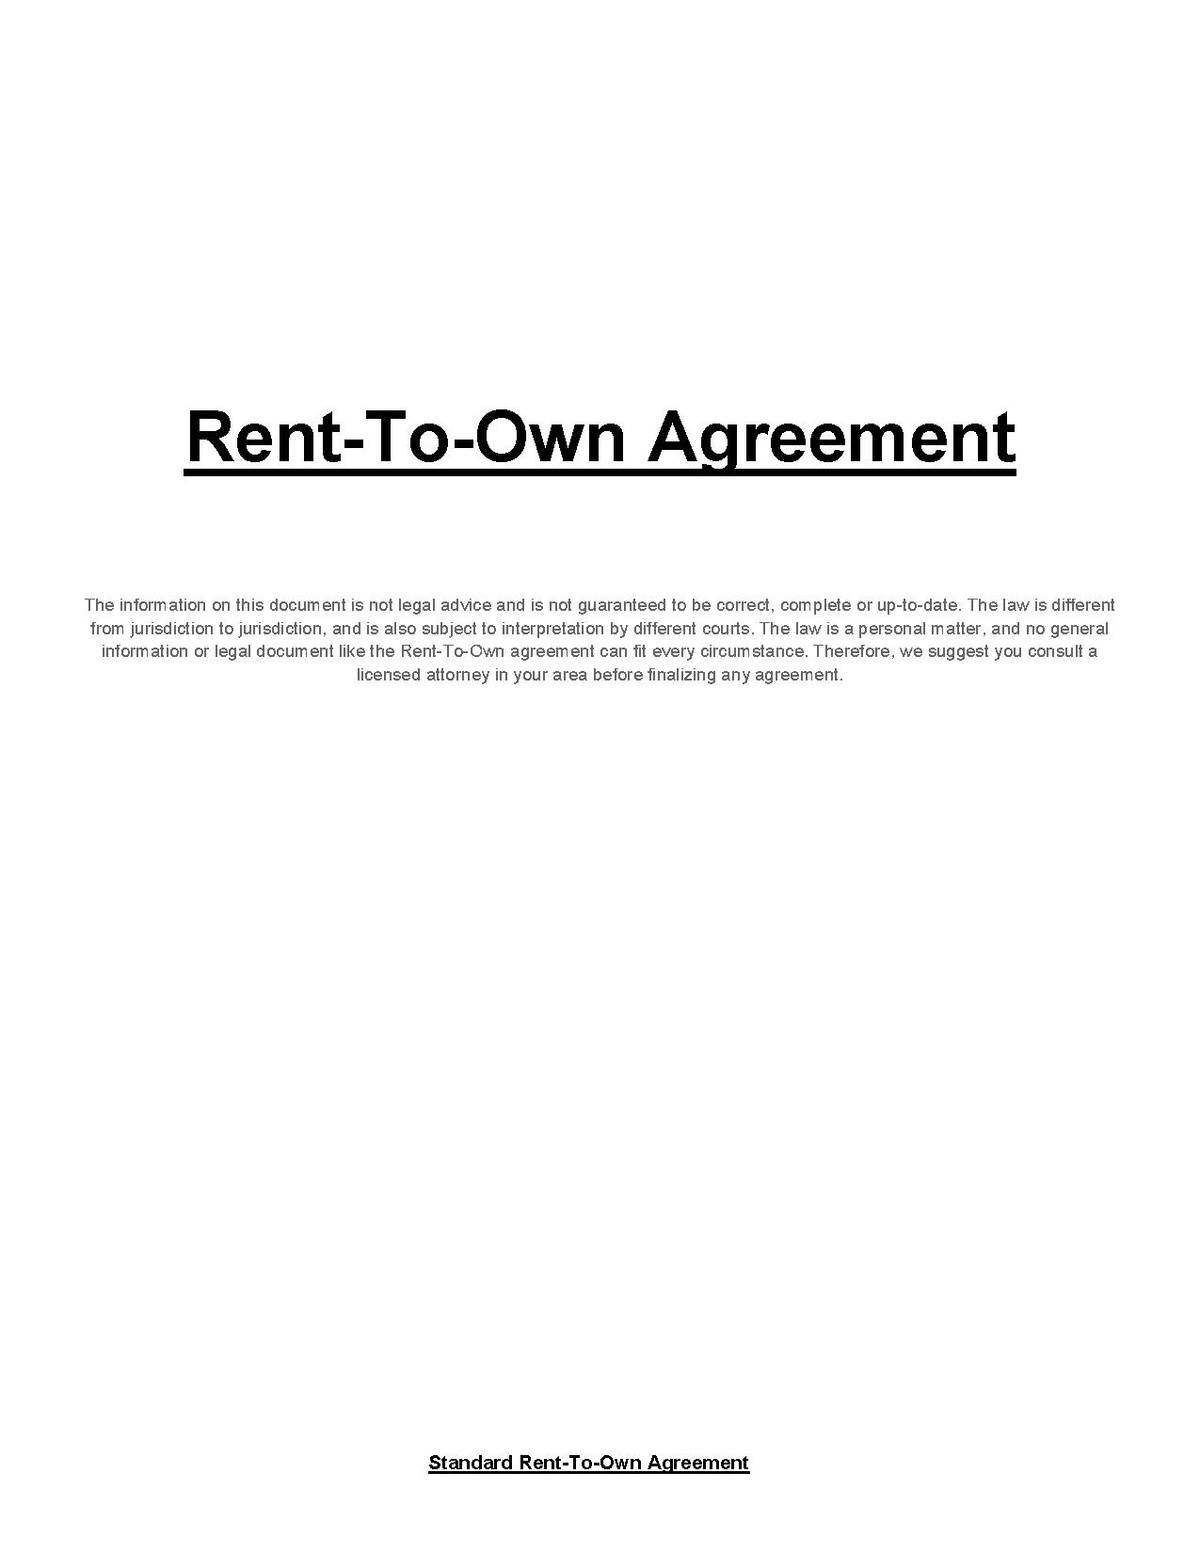 Lease purchase contract Wikipedia